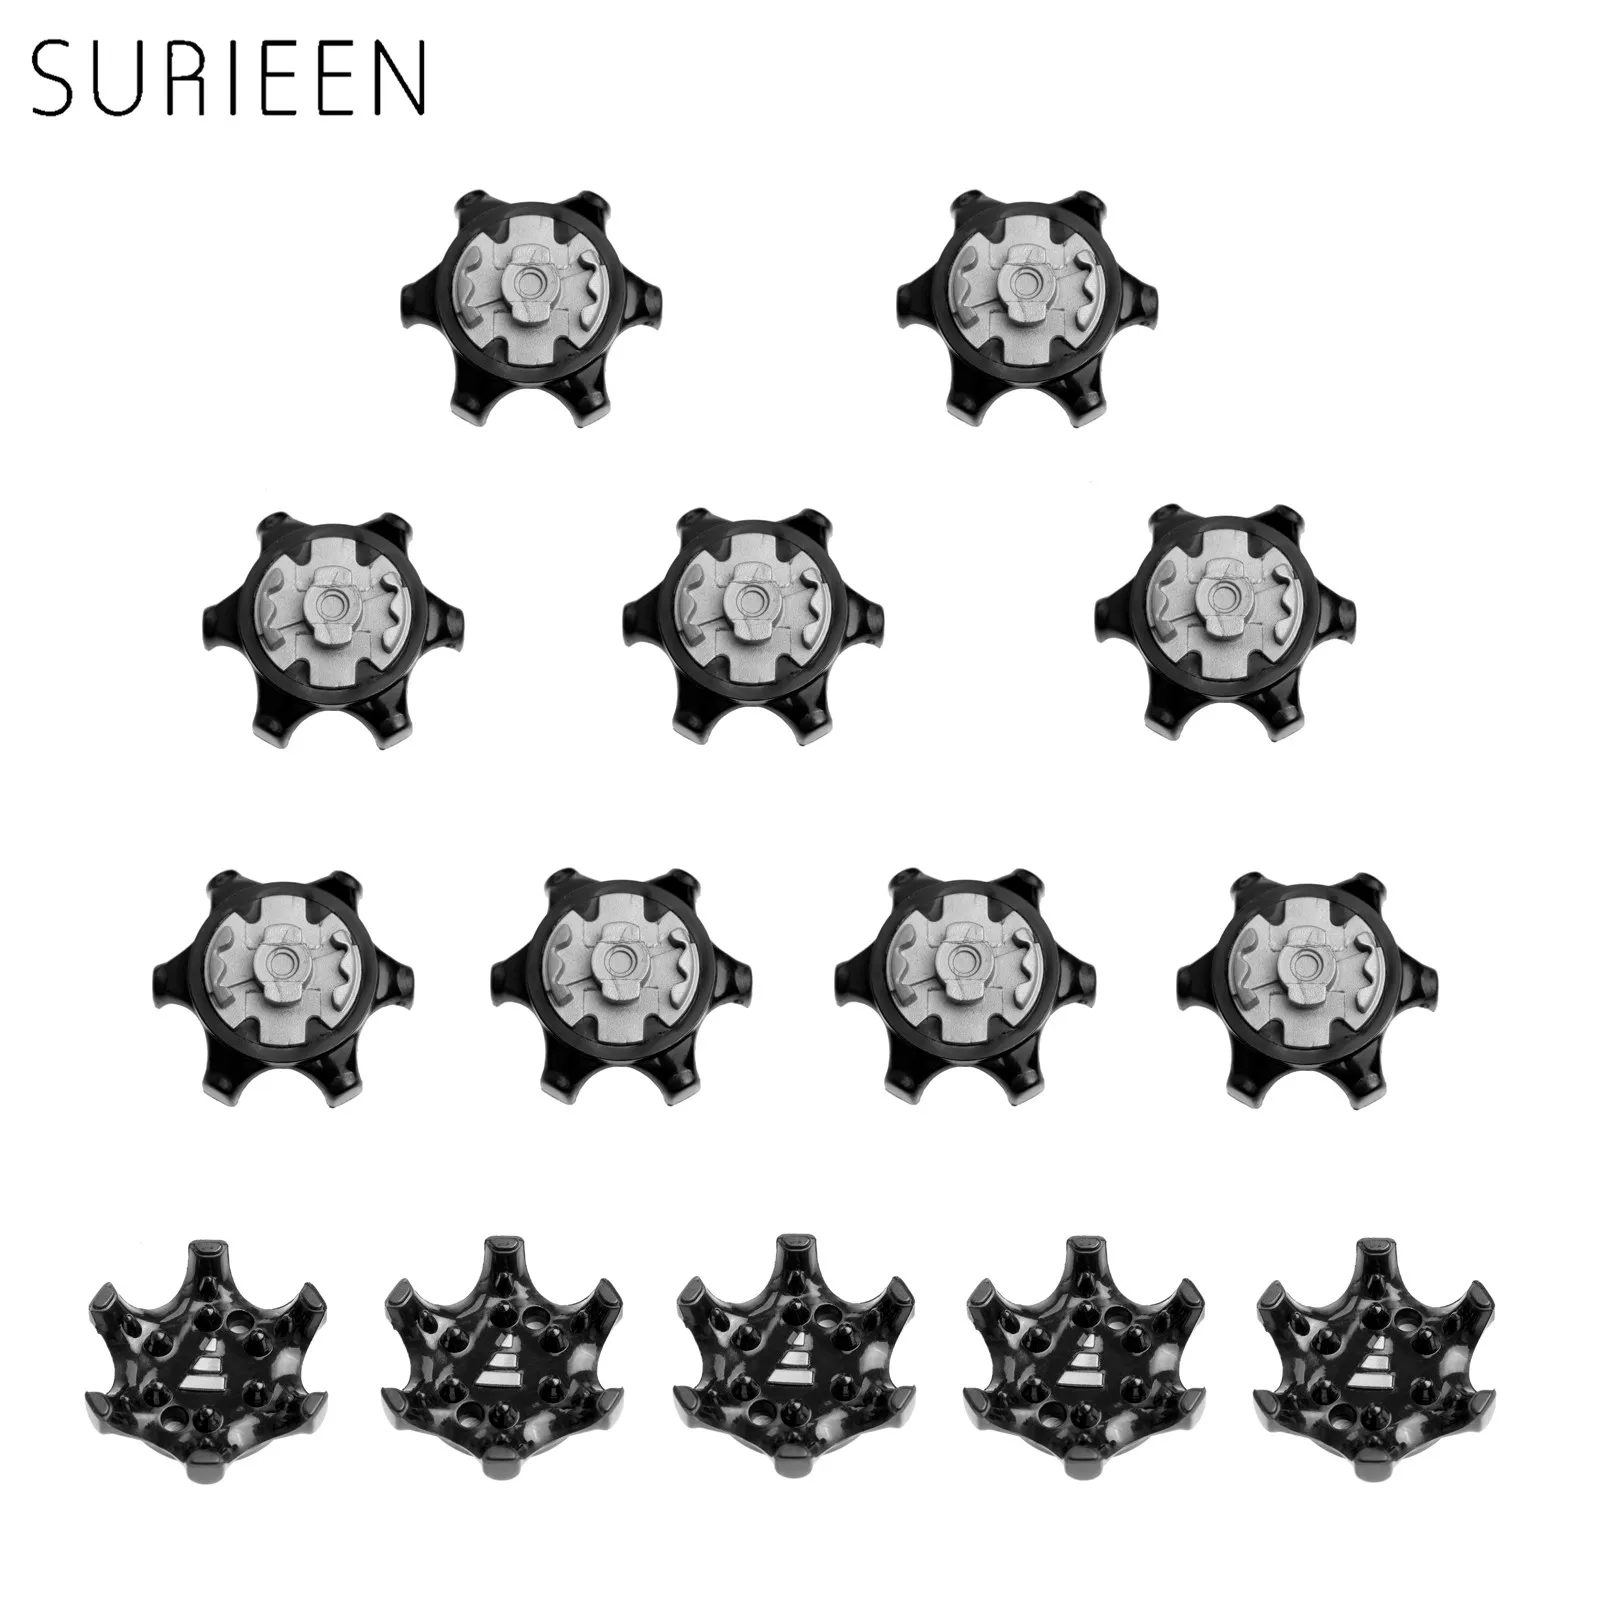 

14Pcs TPR Golf Shoe Spikes Replacement Cleat Champ Fast Twist Screw Studs Stinger Golf Accessories Golf Training Aids Black+Gray